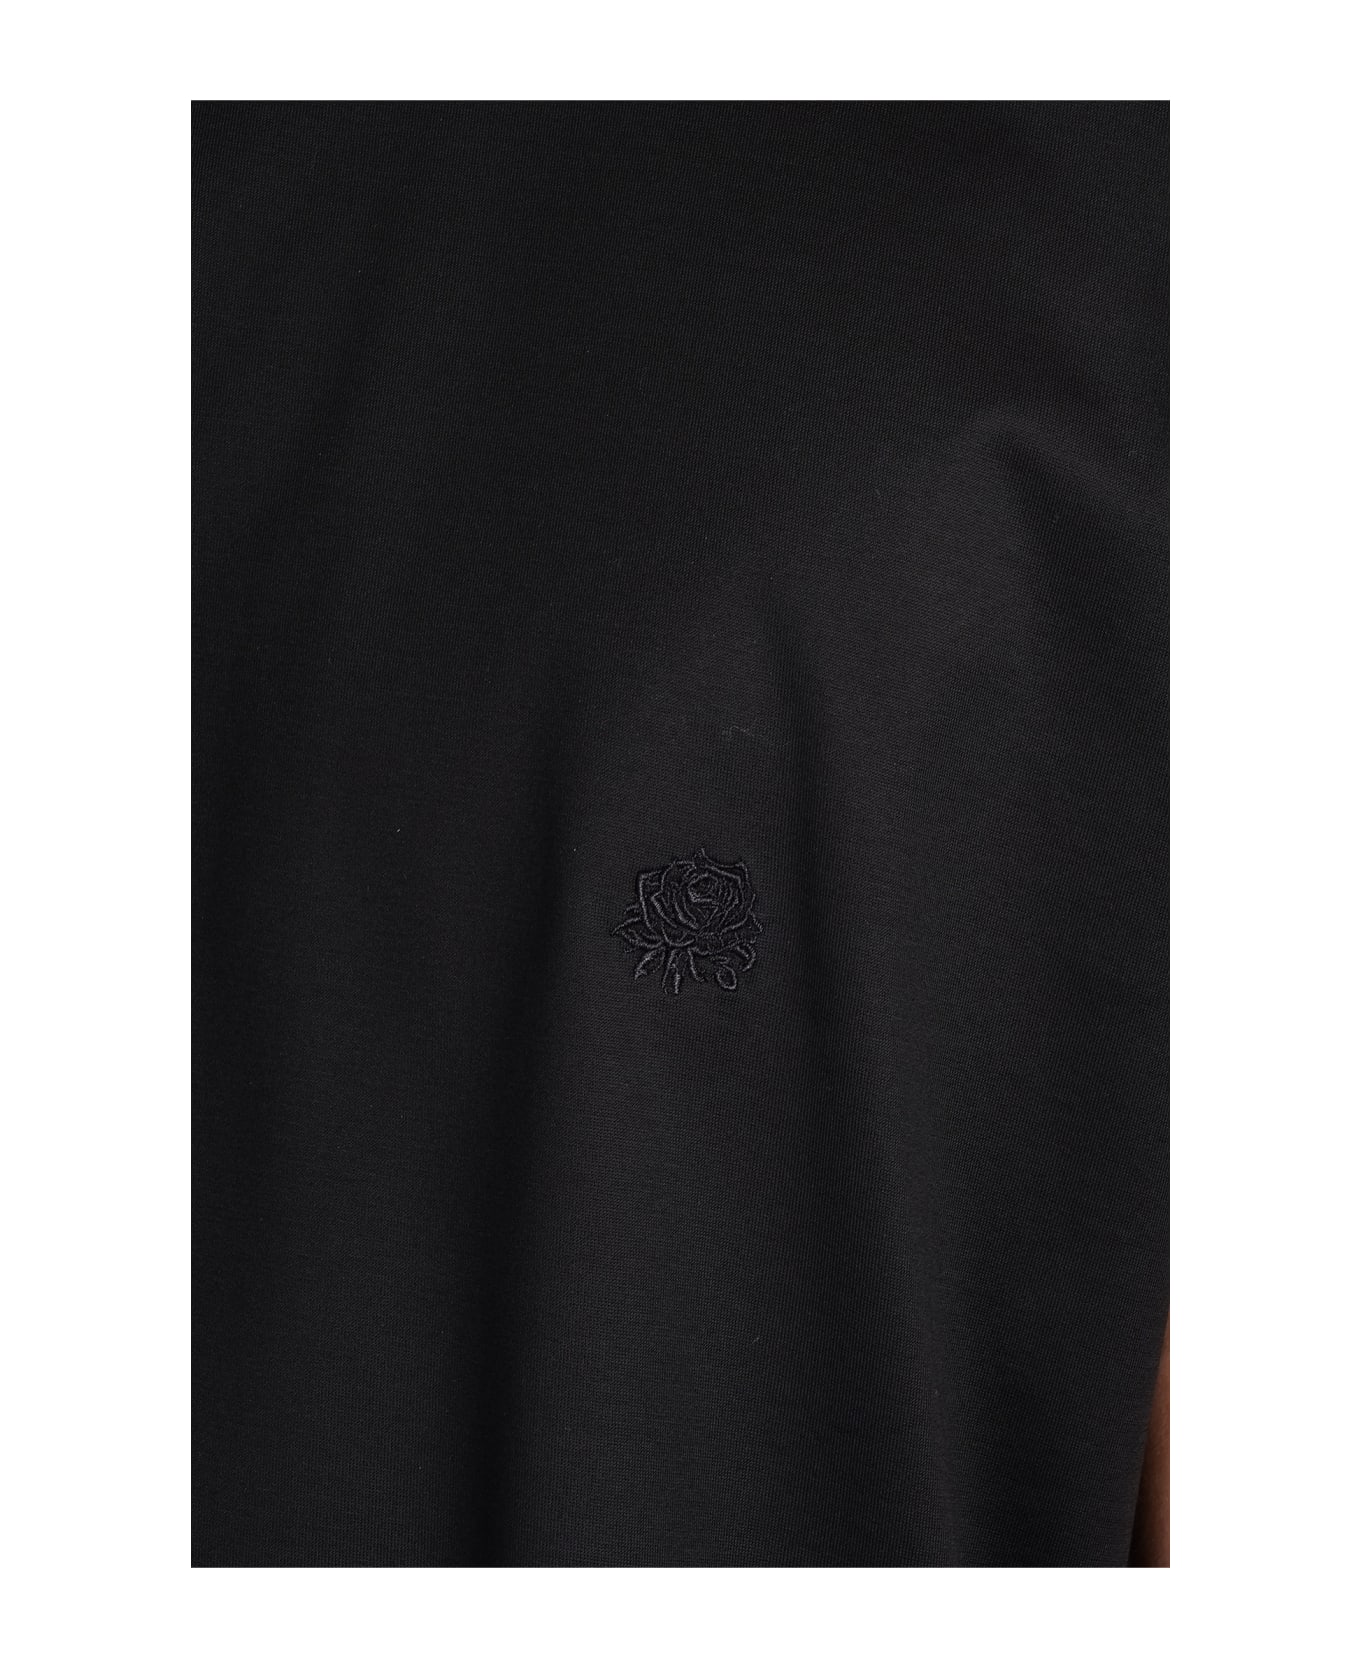 Low Brand B150 Embroidery T-shirt In Black Cotton - black